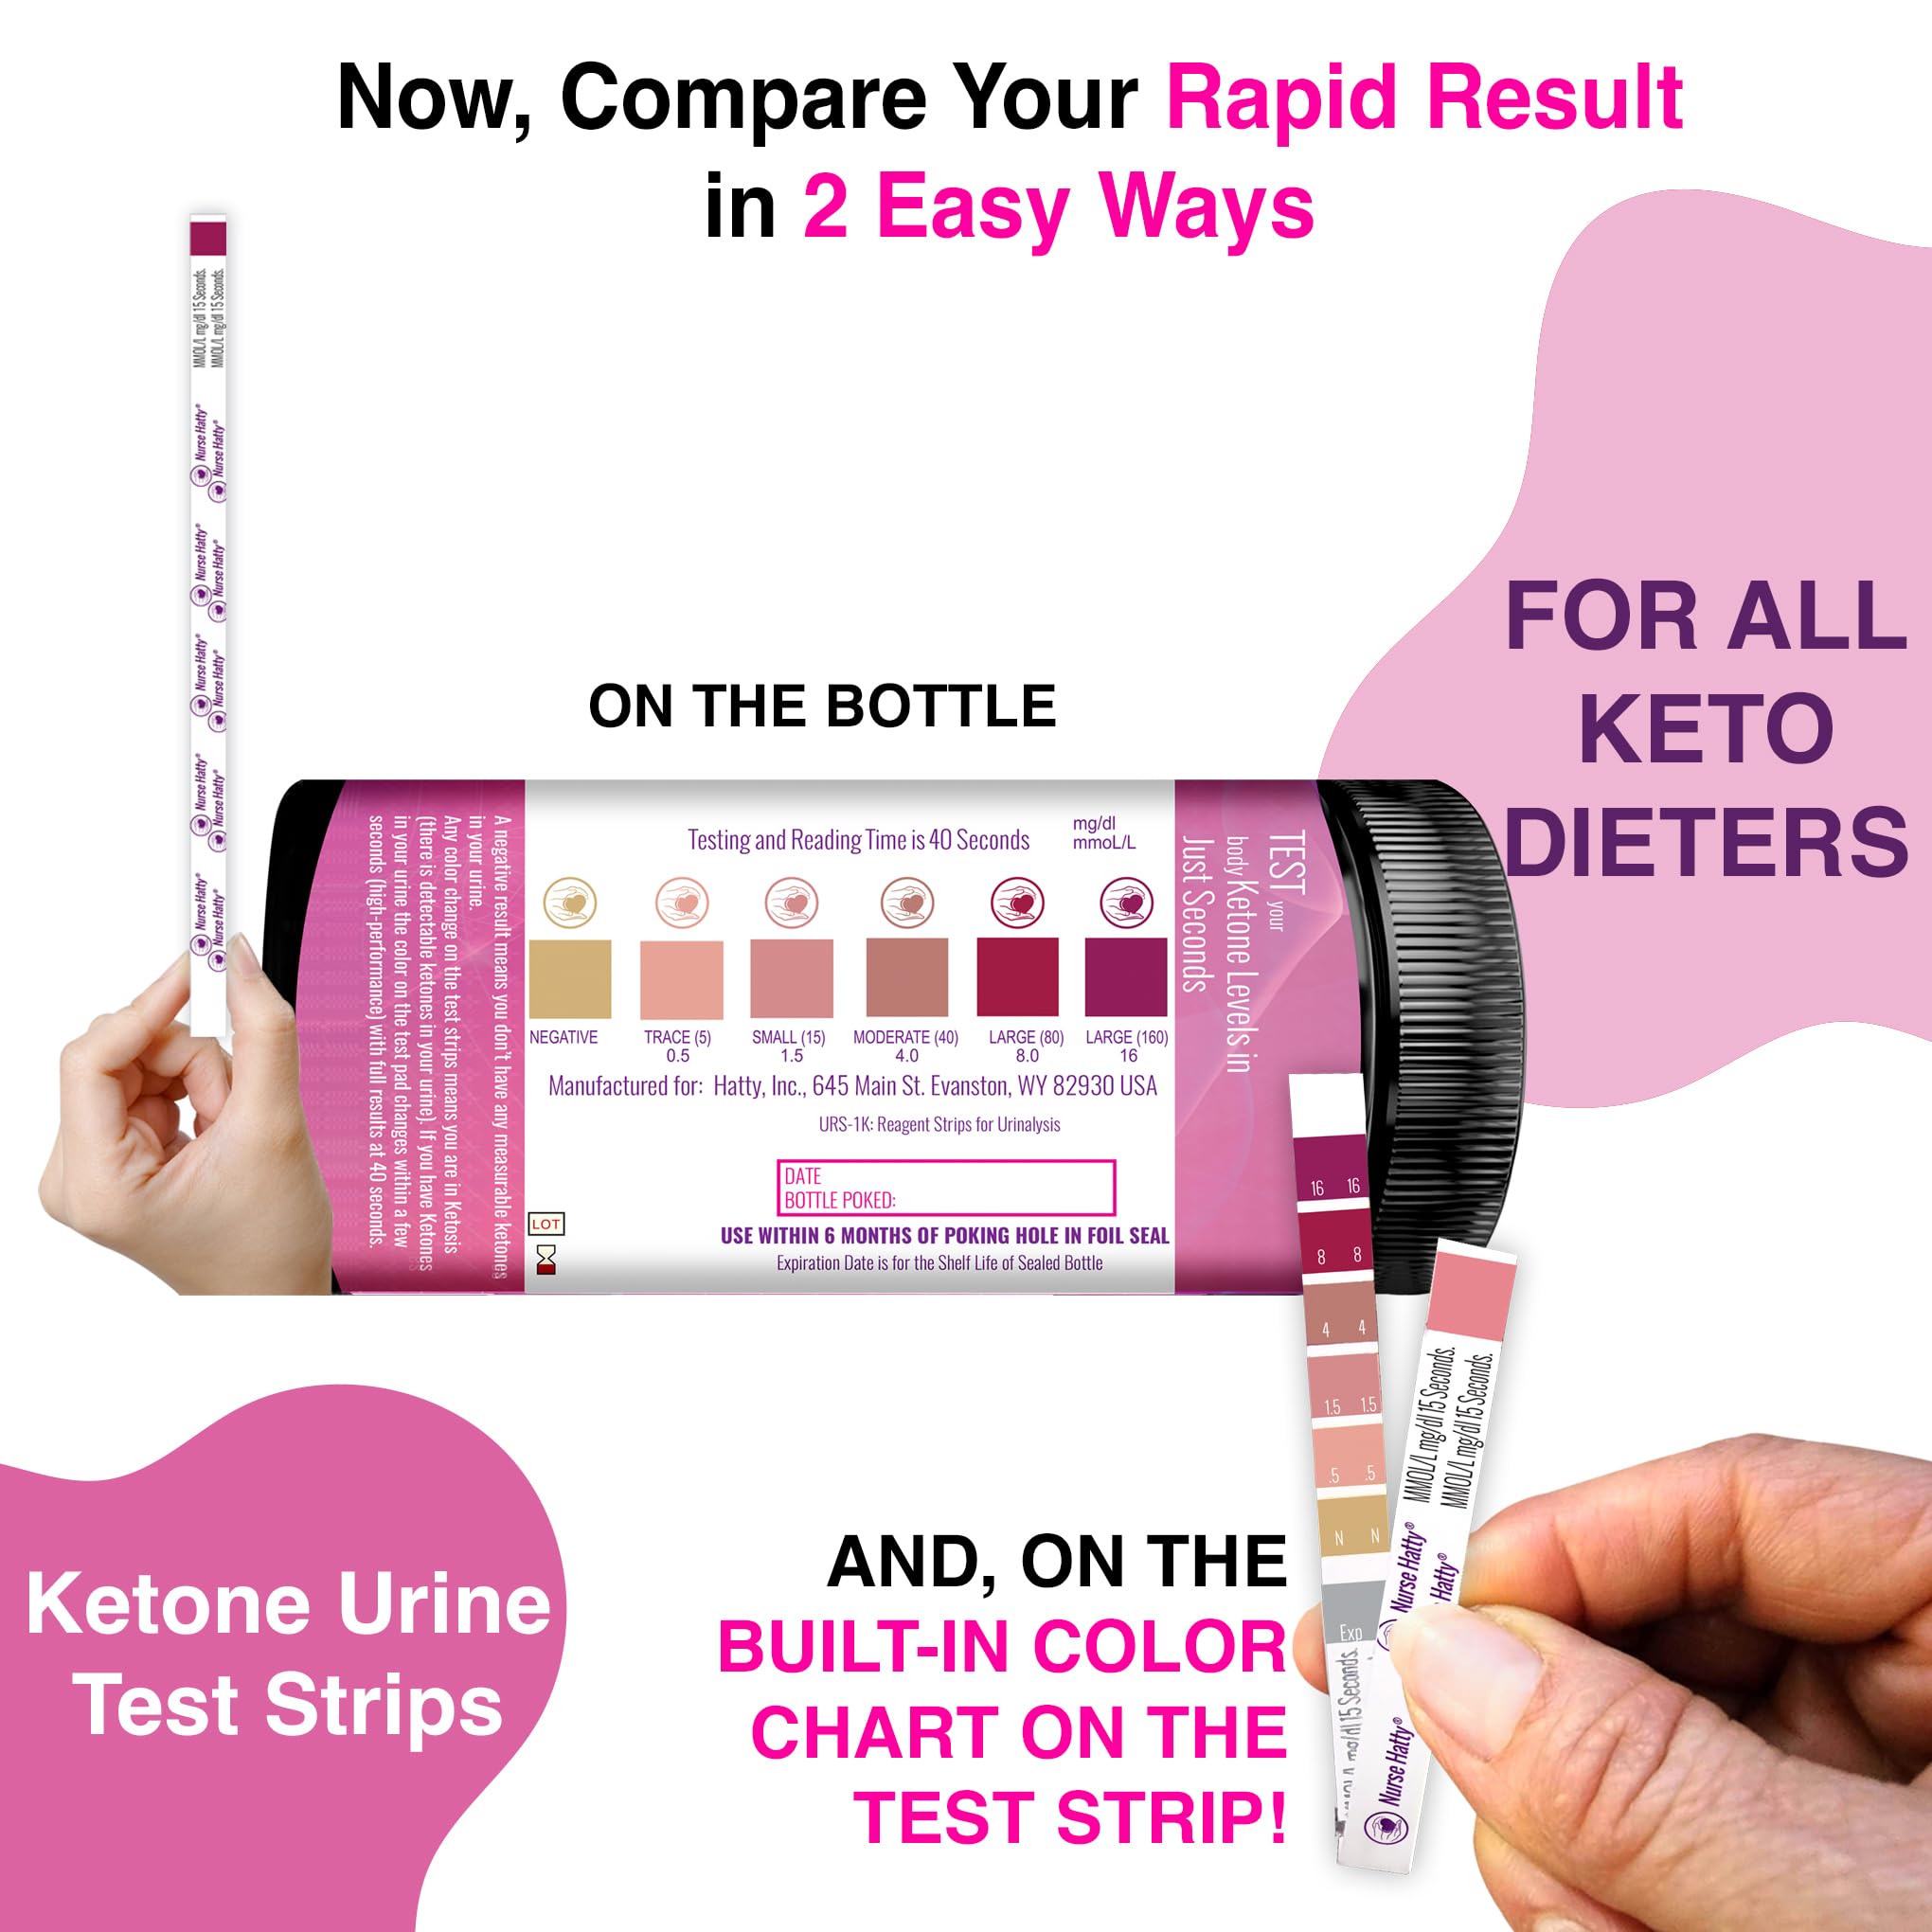 Nurse Hatty - 150 Ketone Test Strips w Built-in Color Chart – Free Keto Guide eBook & Free App - Made-in-The-USA - Urine Test for Ketogenic, Ketosis, Low Carb, Atkins & Paleo Diets - Extra Long Strips